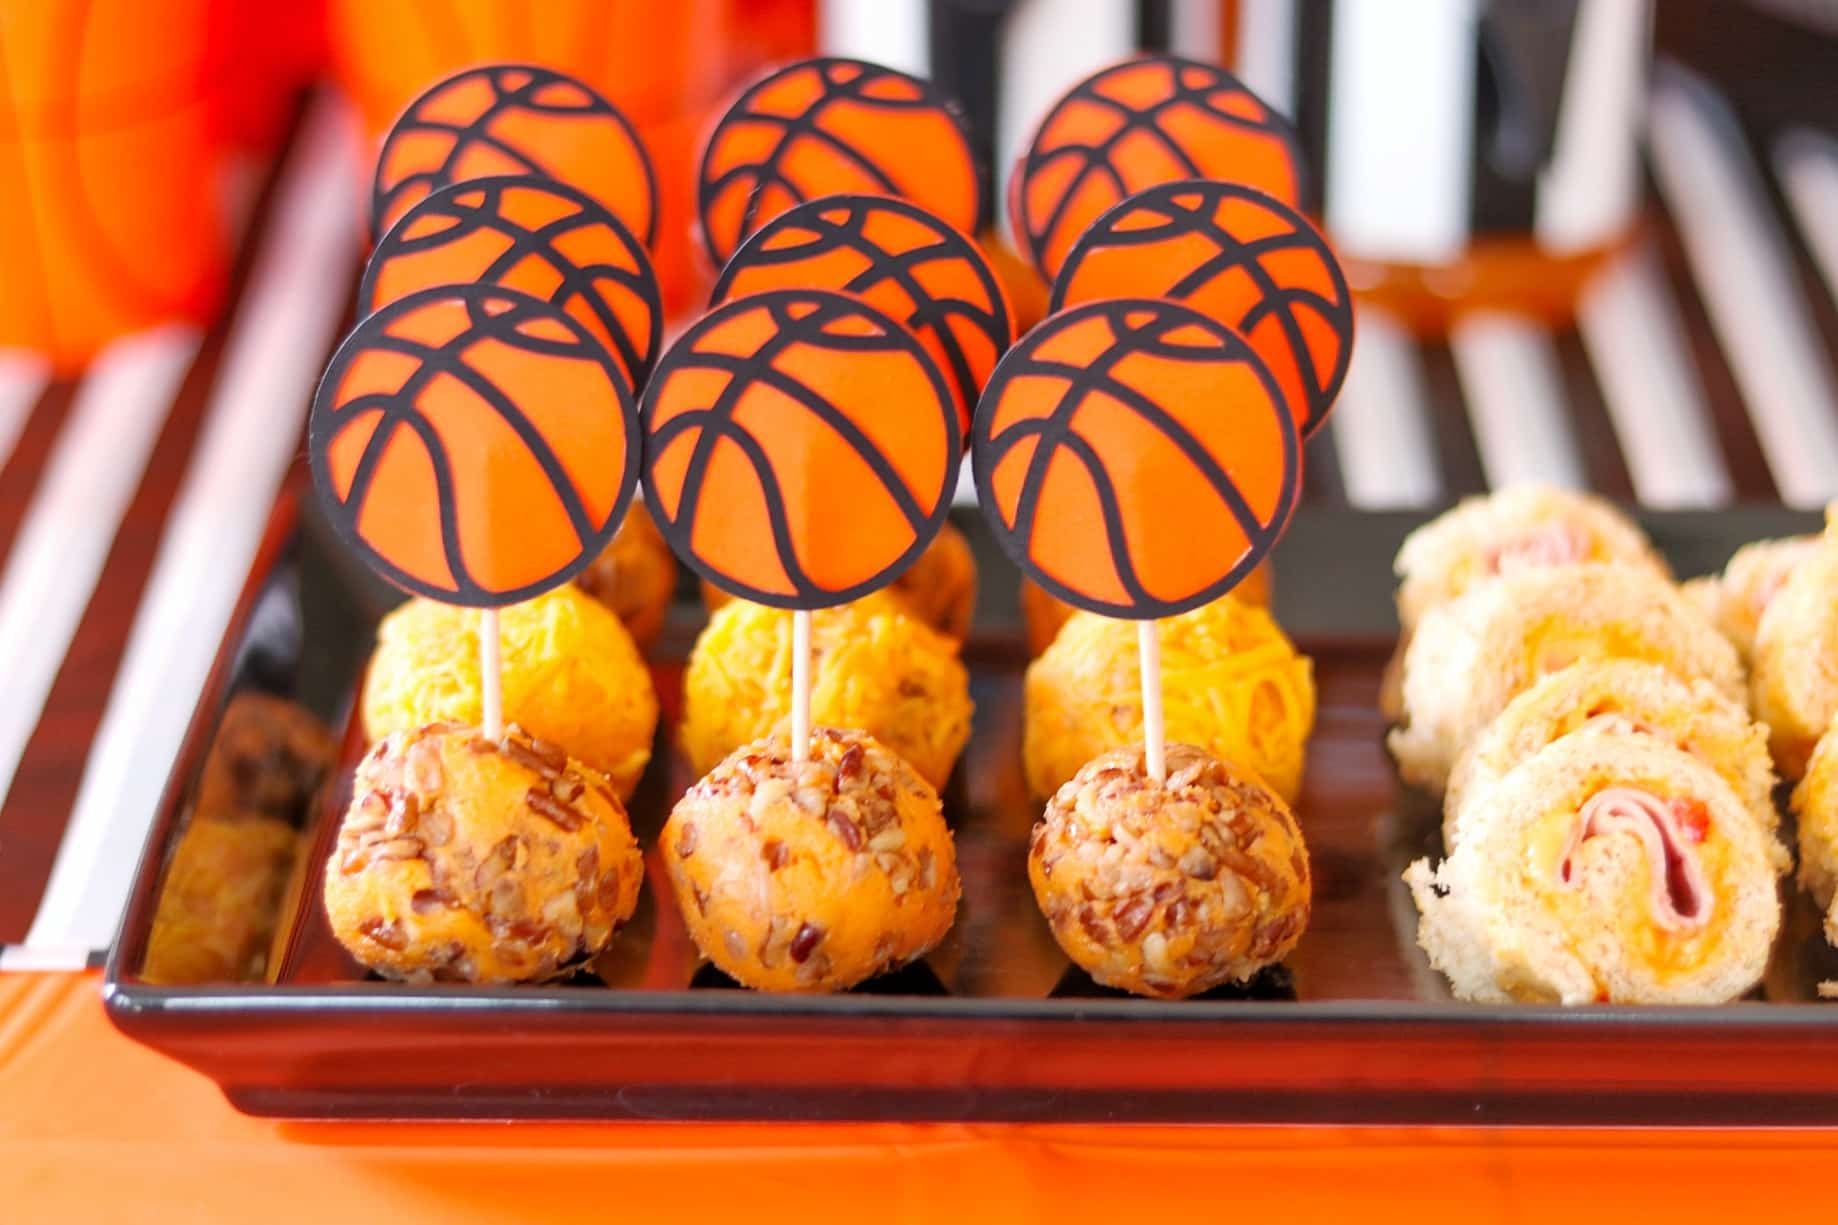 basketball themed snacks for a Final Four watch party